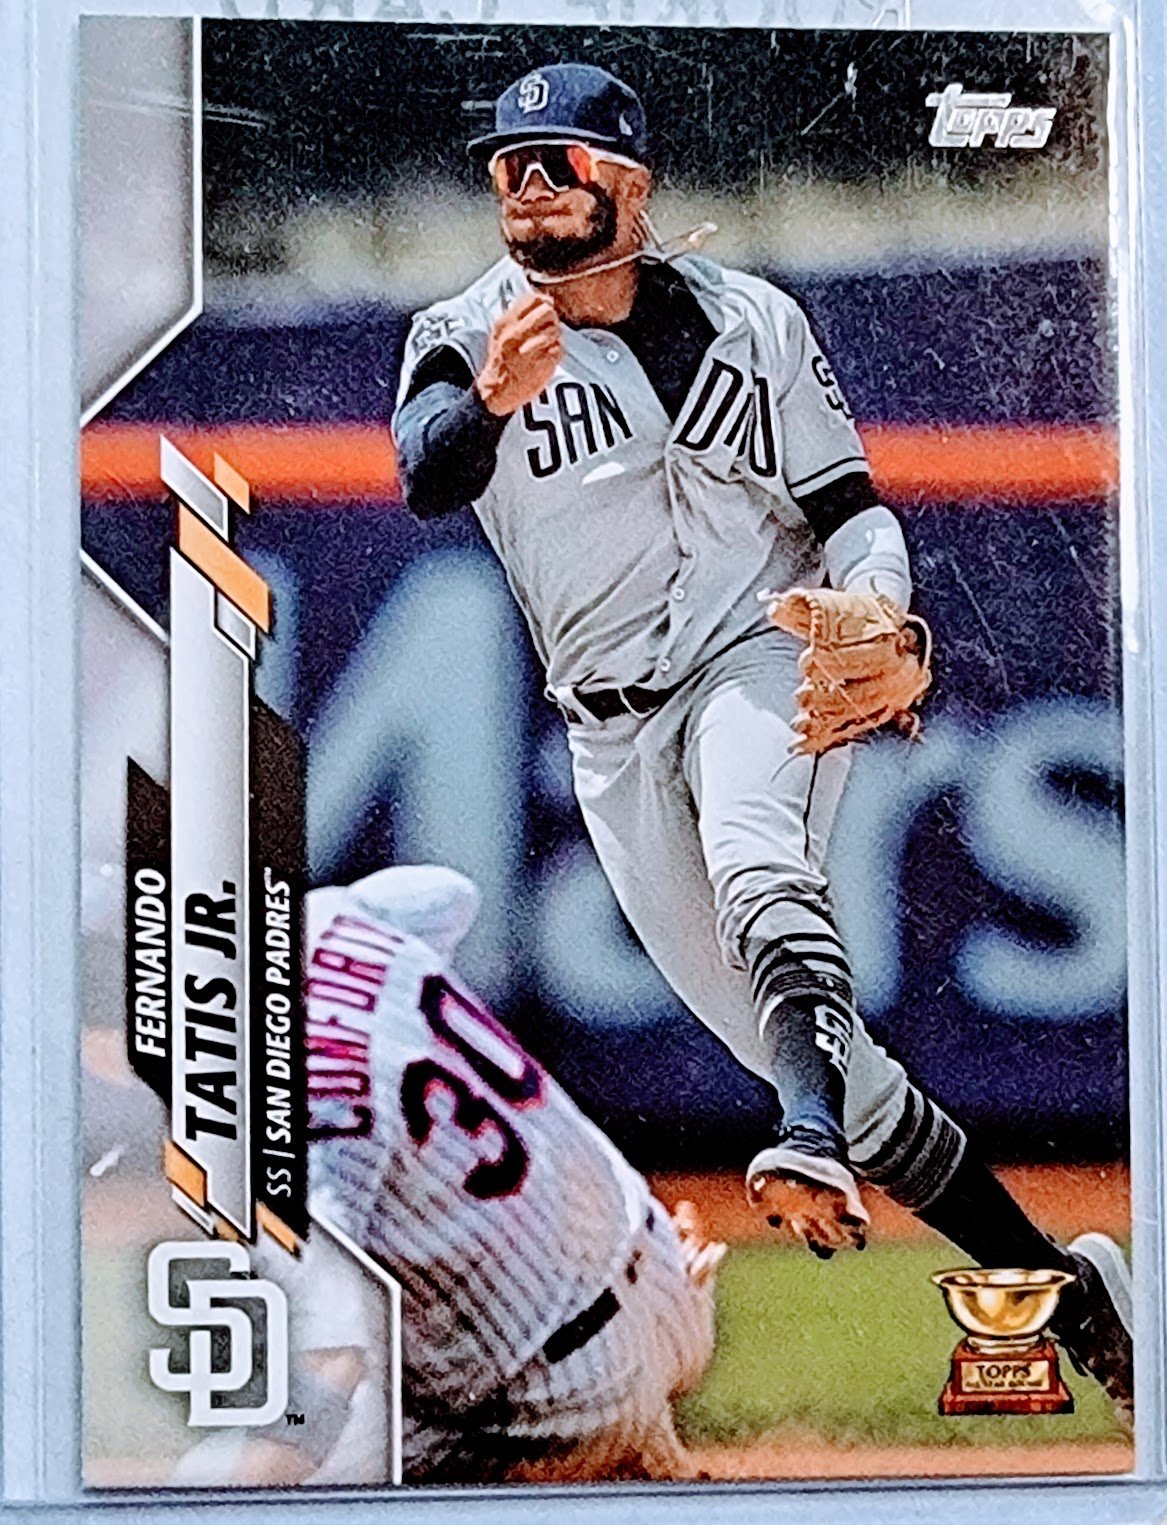 2020 Topps Fernando Tatis Jr All Star Rookie Cup Baseball Card TPTV simple Xclusive Collectibles   